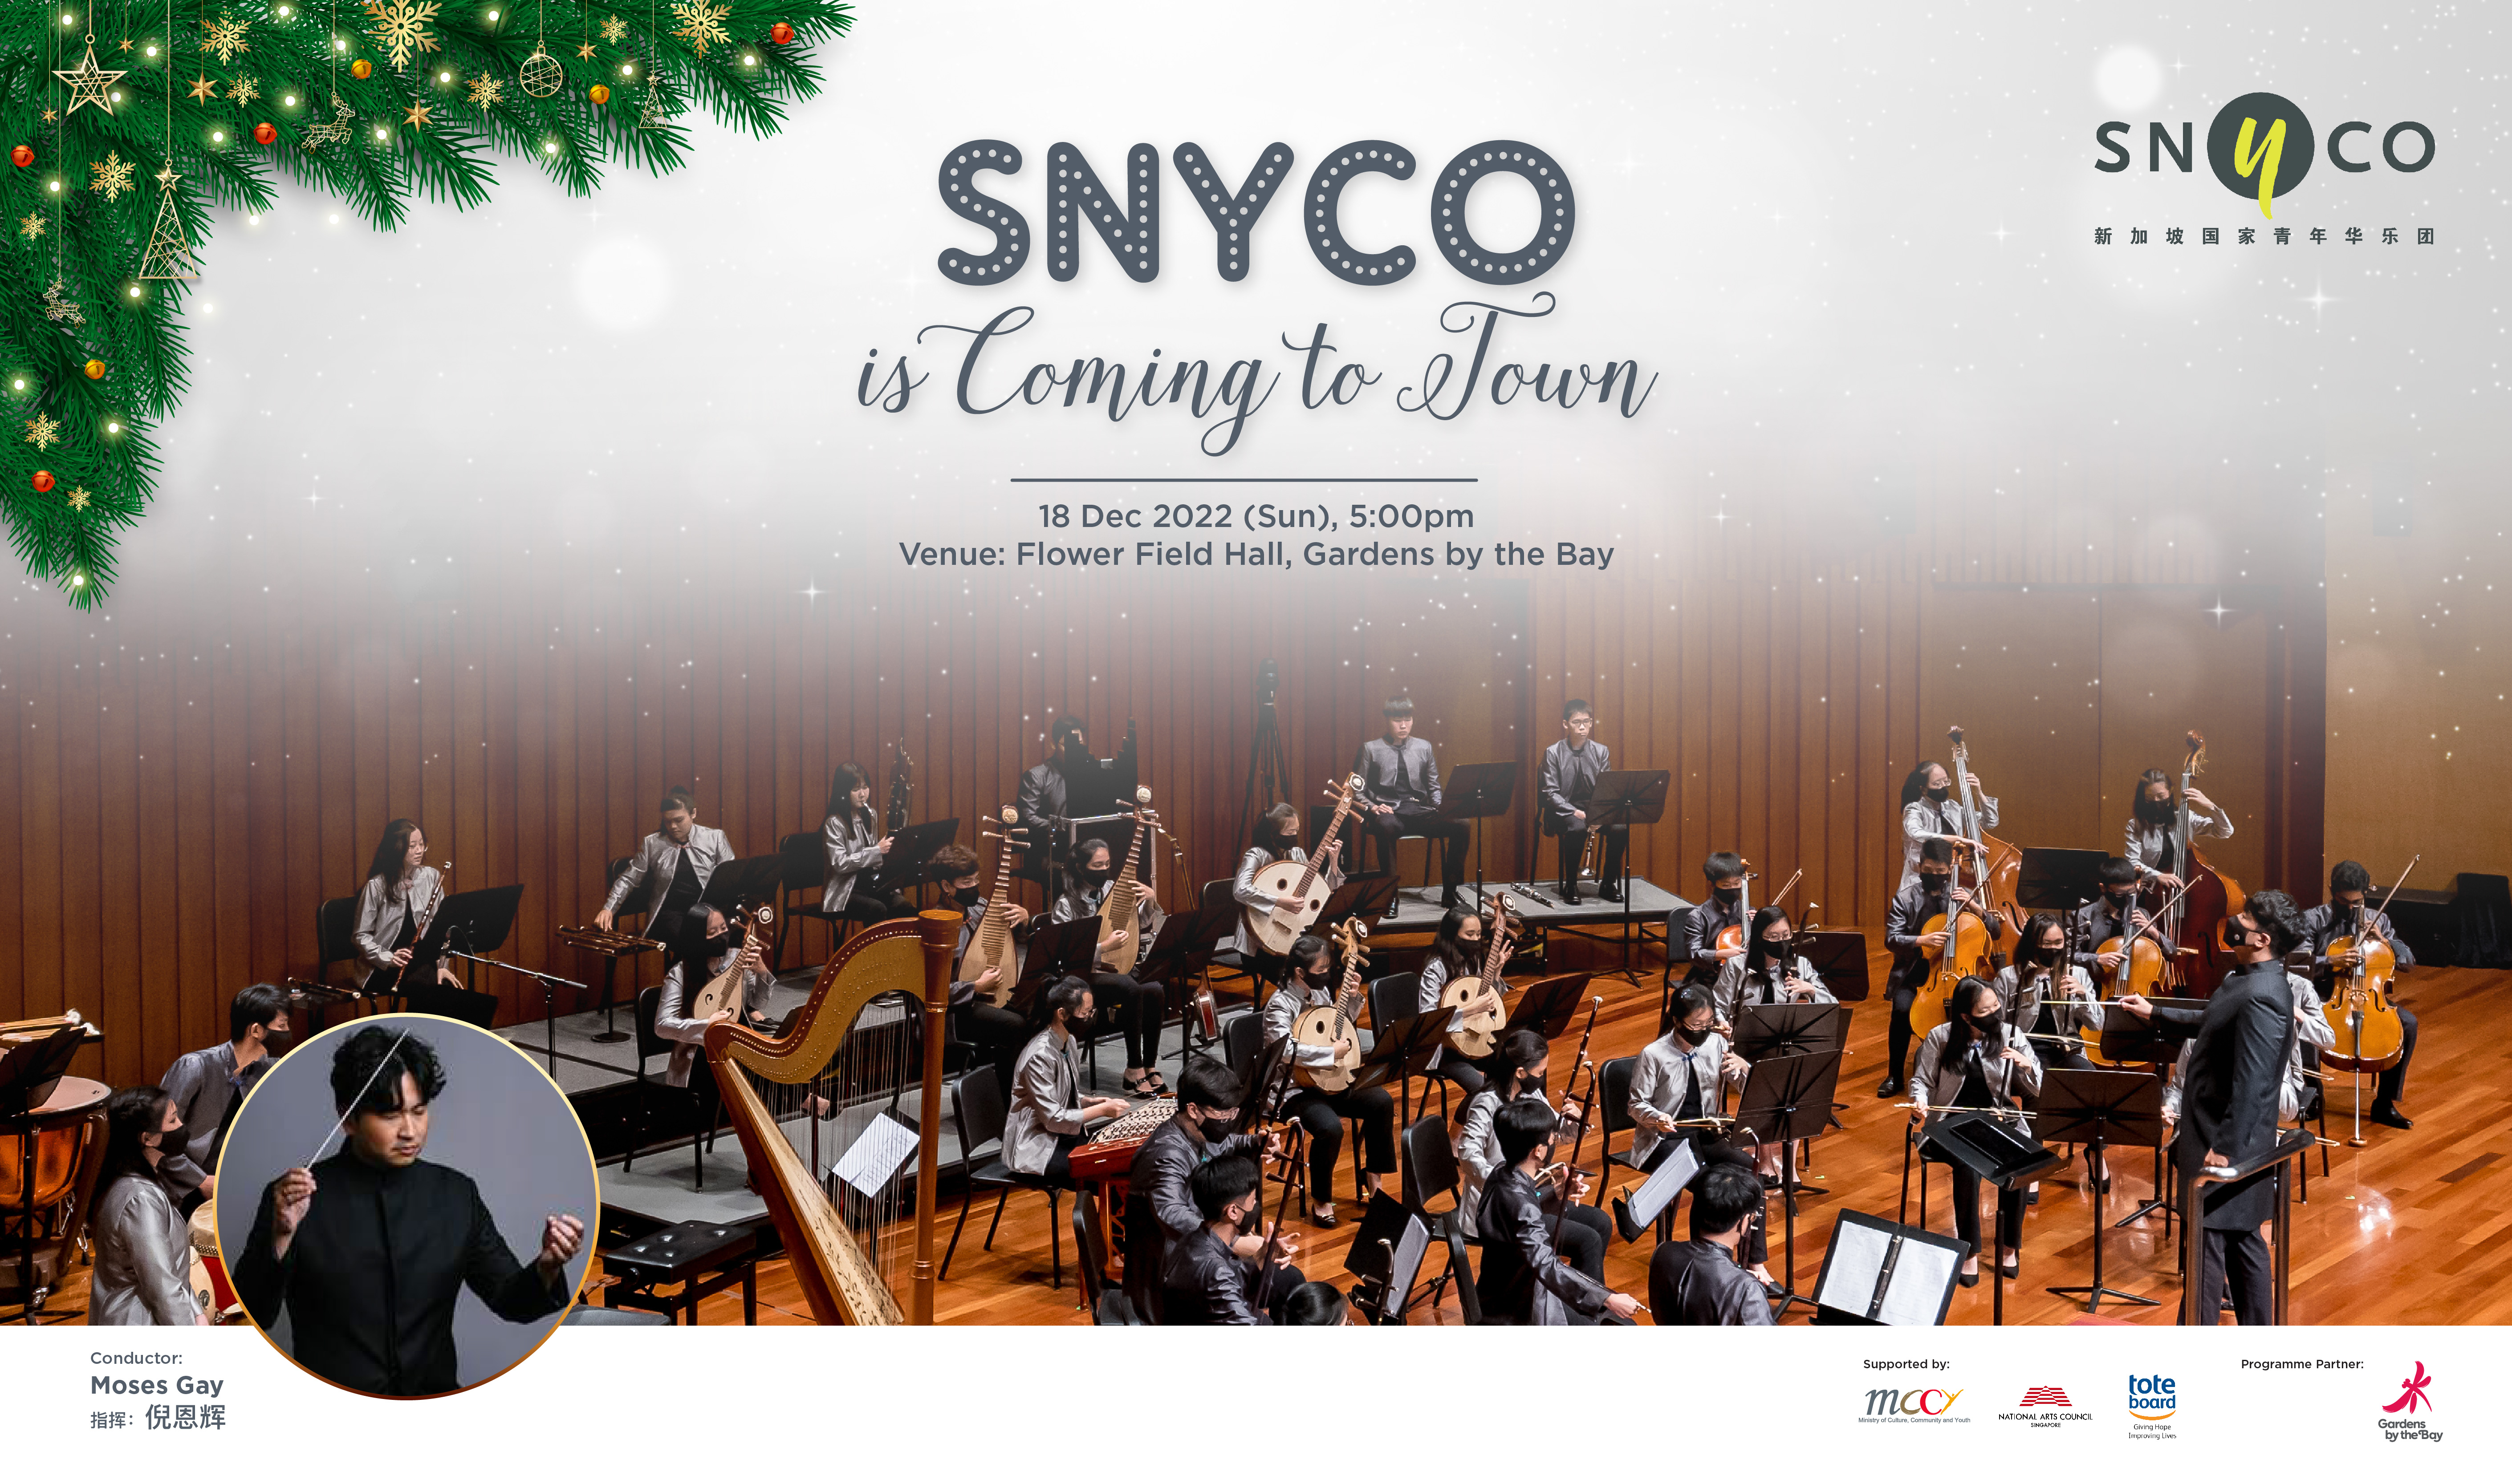 SNYCO_Outreach_1354x800-01 Kam Ning with SCO: Butterfly Lovers - Europe Pre-Tour Concert